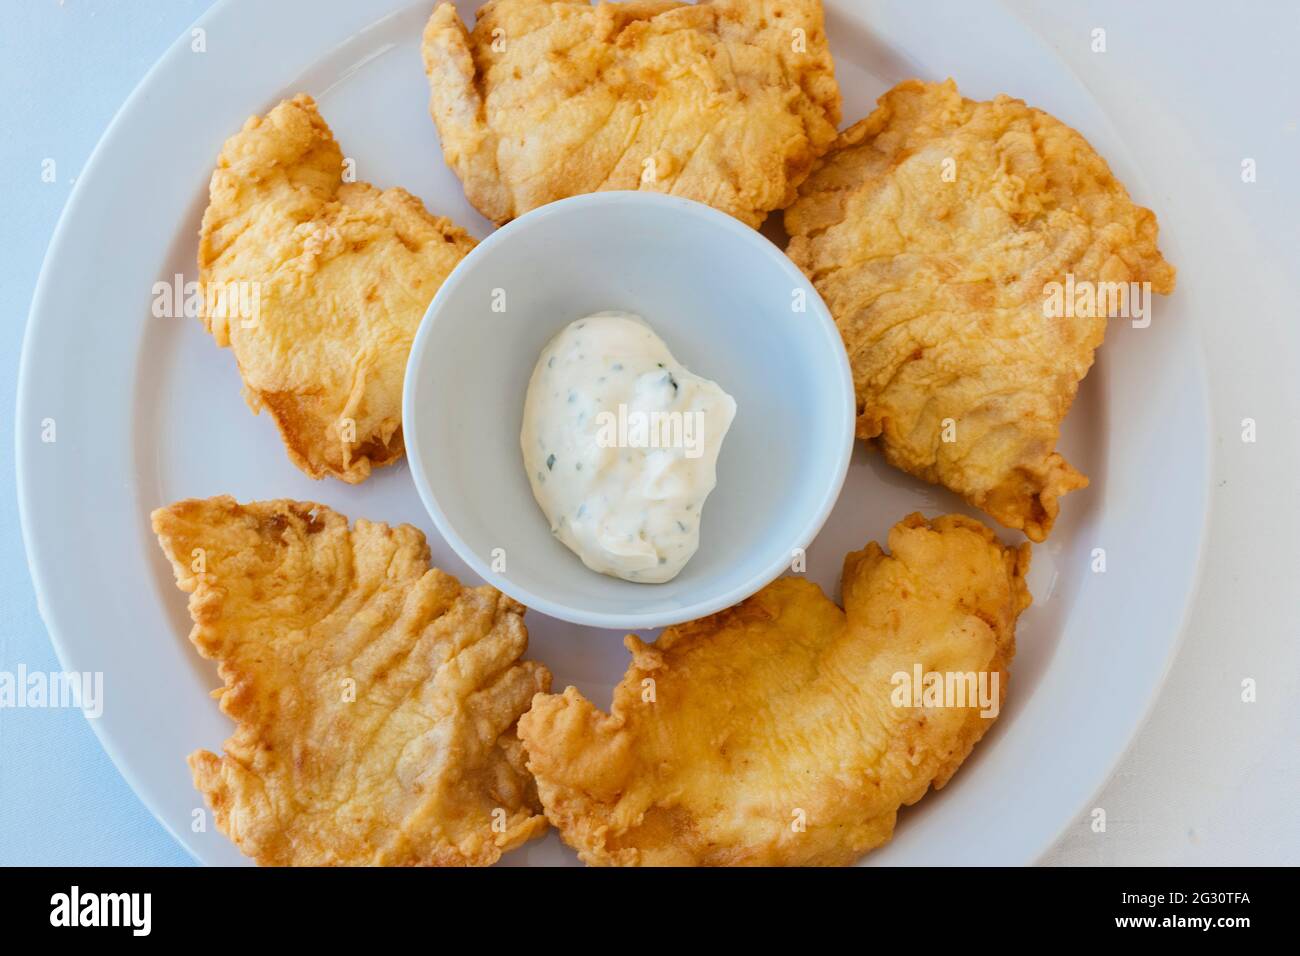 Typical Andalusian food. Rosada fried with aioli. With great popularity in Spain, La rosada, Genypterus blacodes, is not an indigenous fish, it is a s Stock Photo